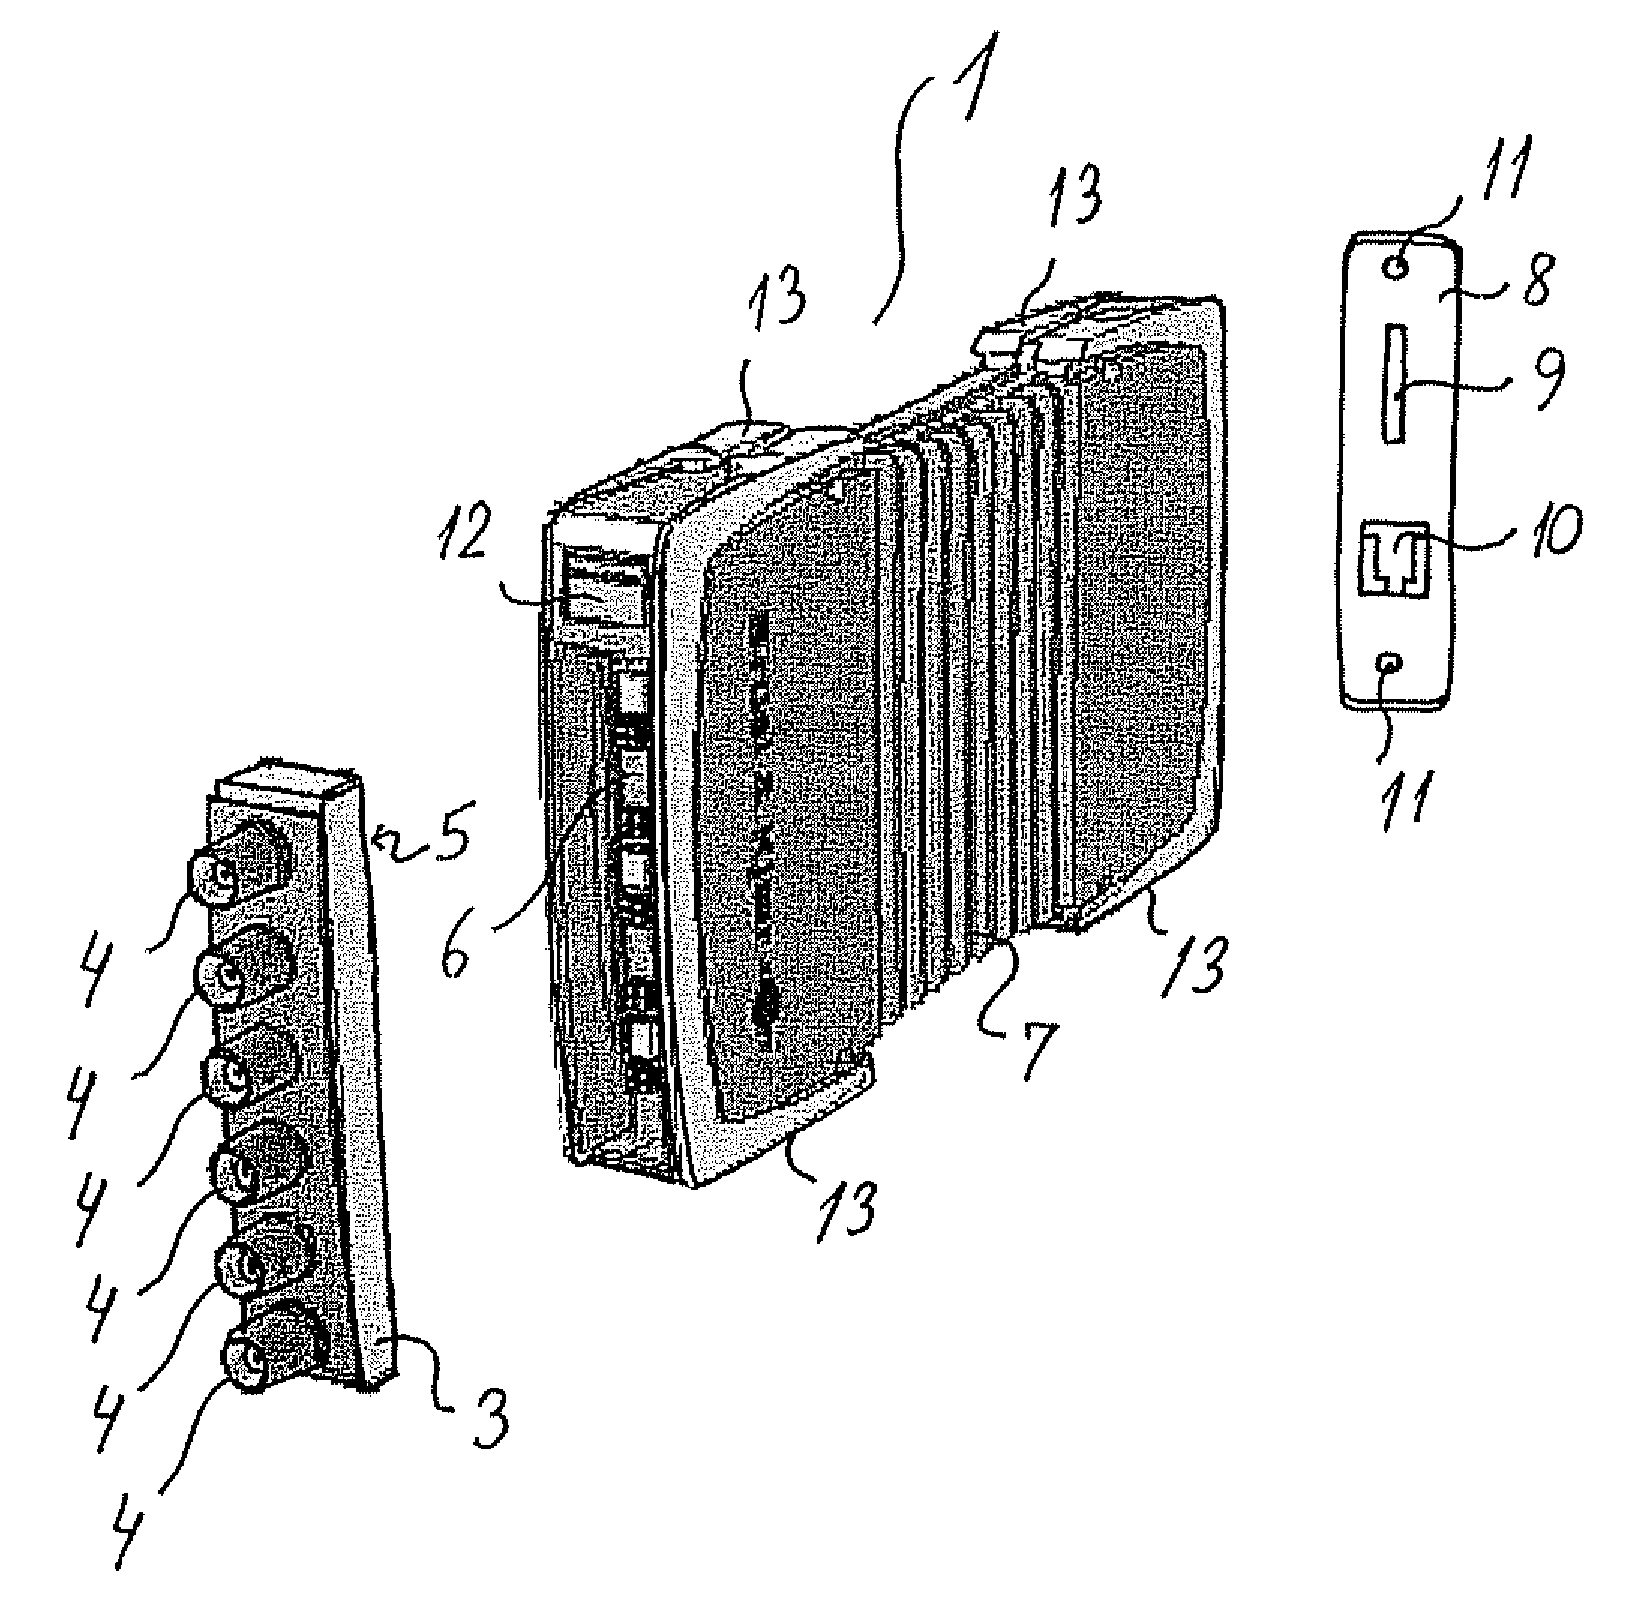 Data acquisition module and system